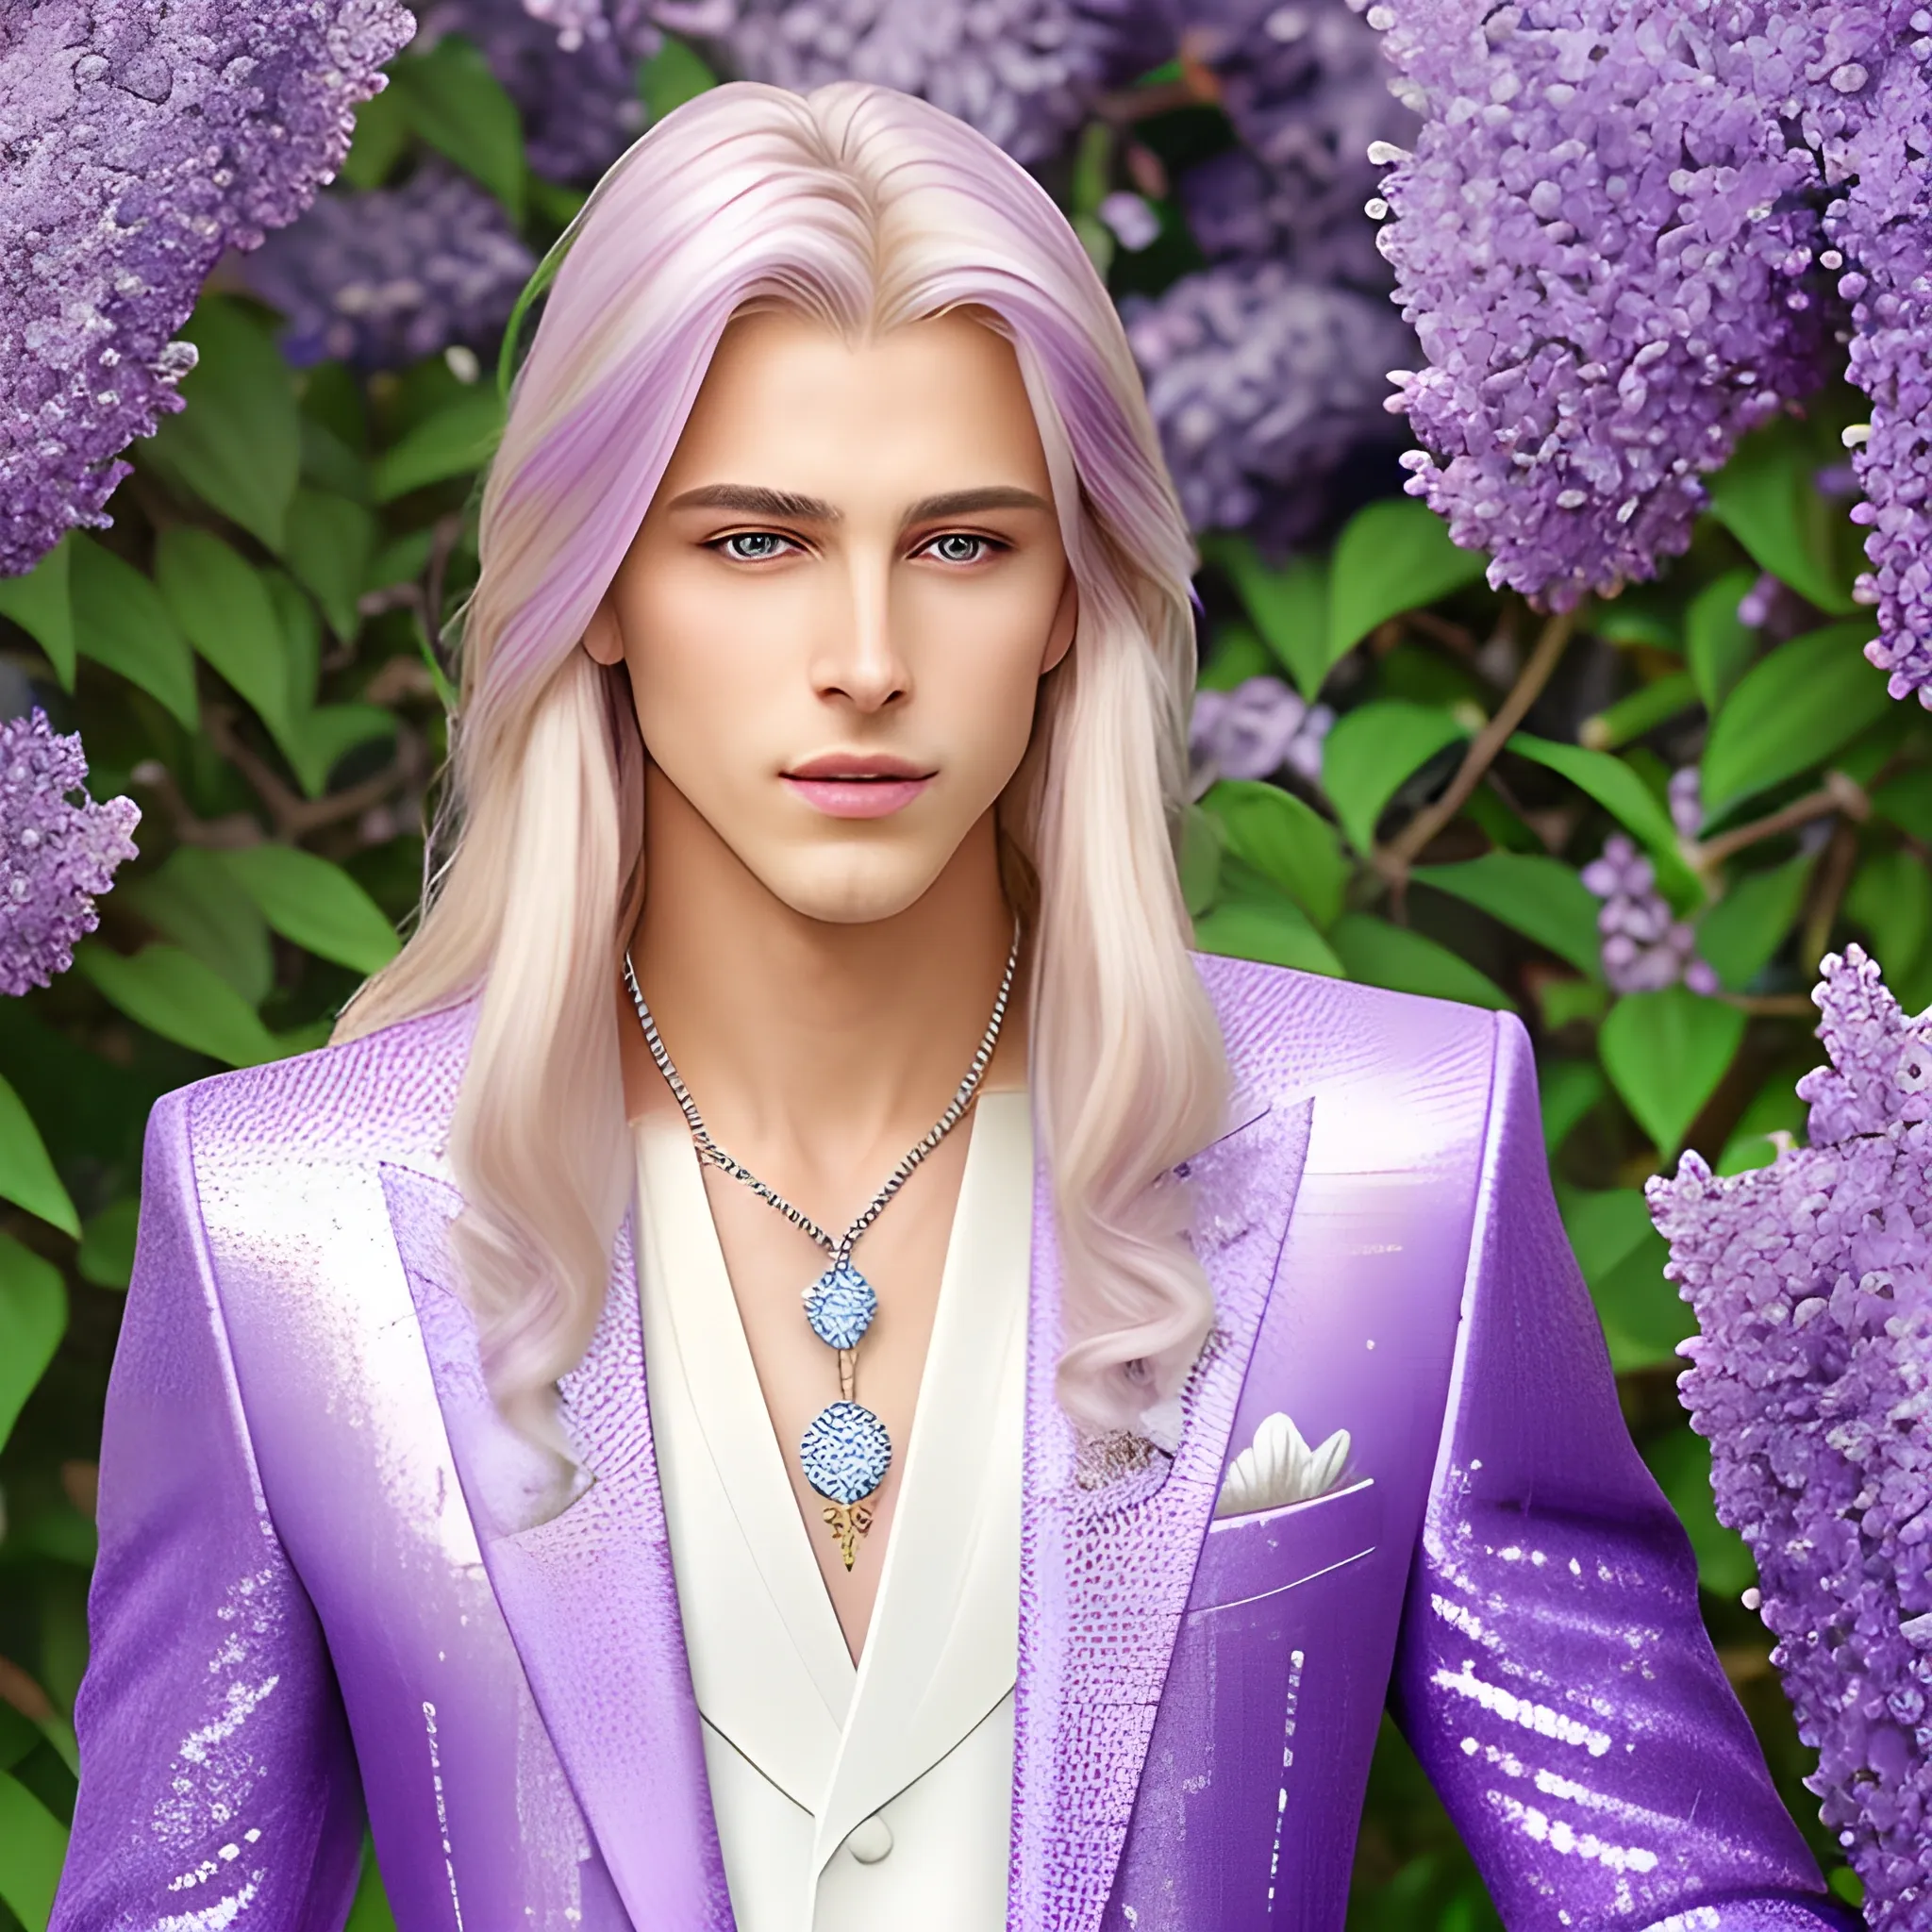 Lilac Prince, beautiful man wears a lavender sequined suit. he has long, sleek blond hair, and sits in front of lilac bushes. His features are symmetrical, handsome, and anatomically correct. he wears amethyst jewelry. Lips are soft, in a slight smile.